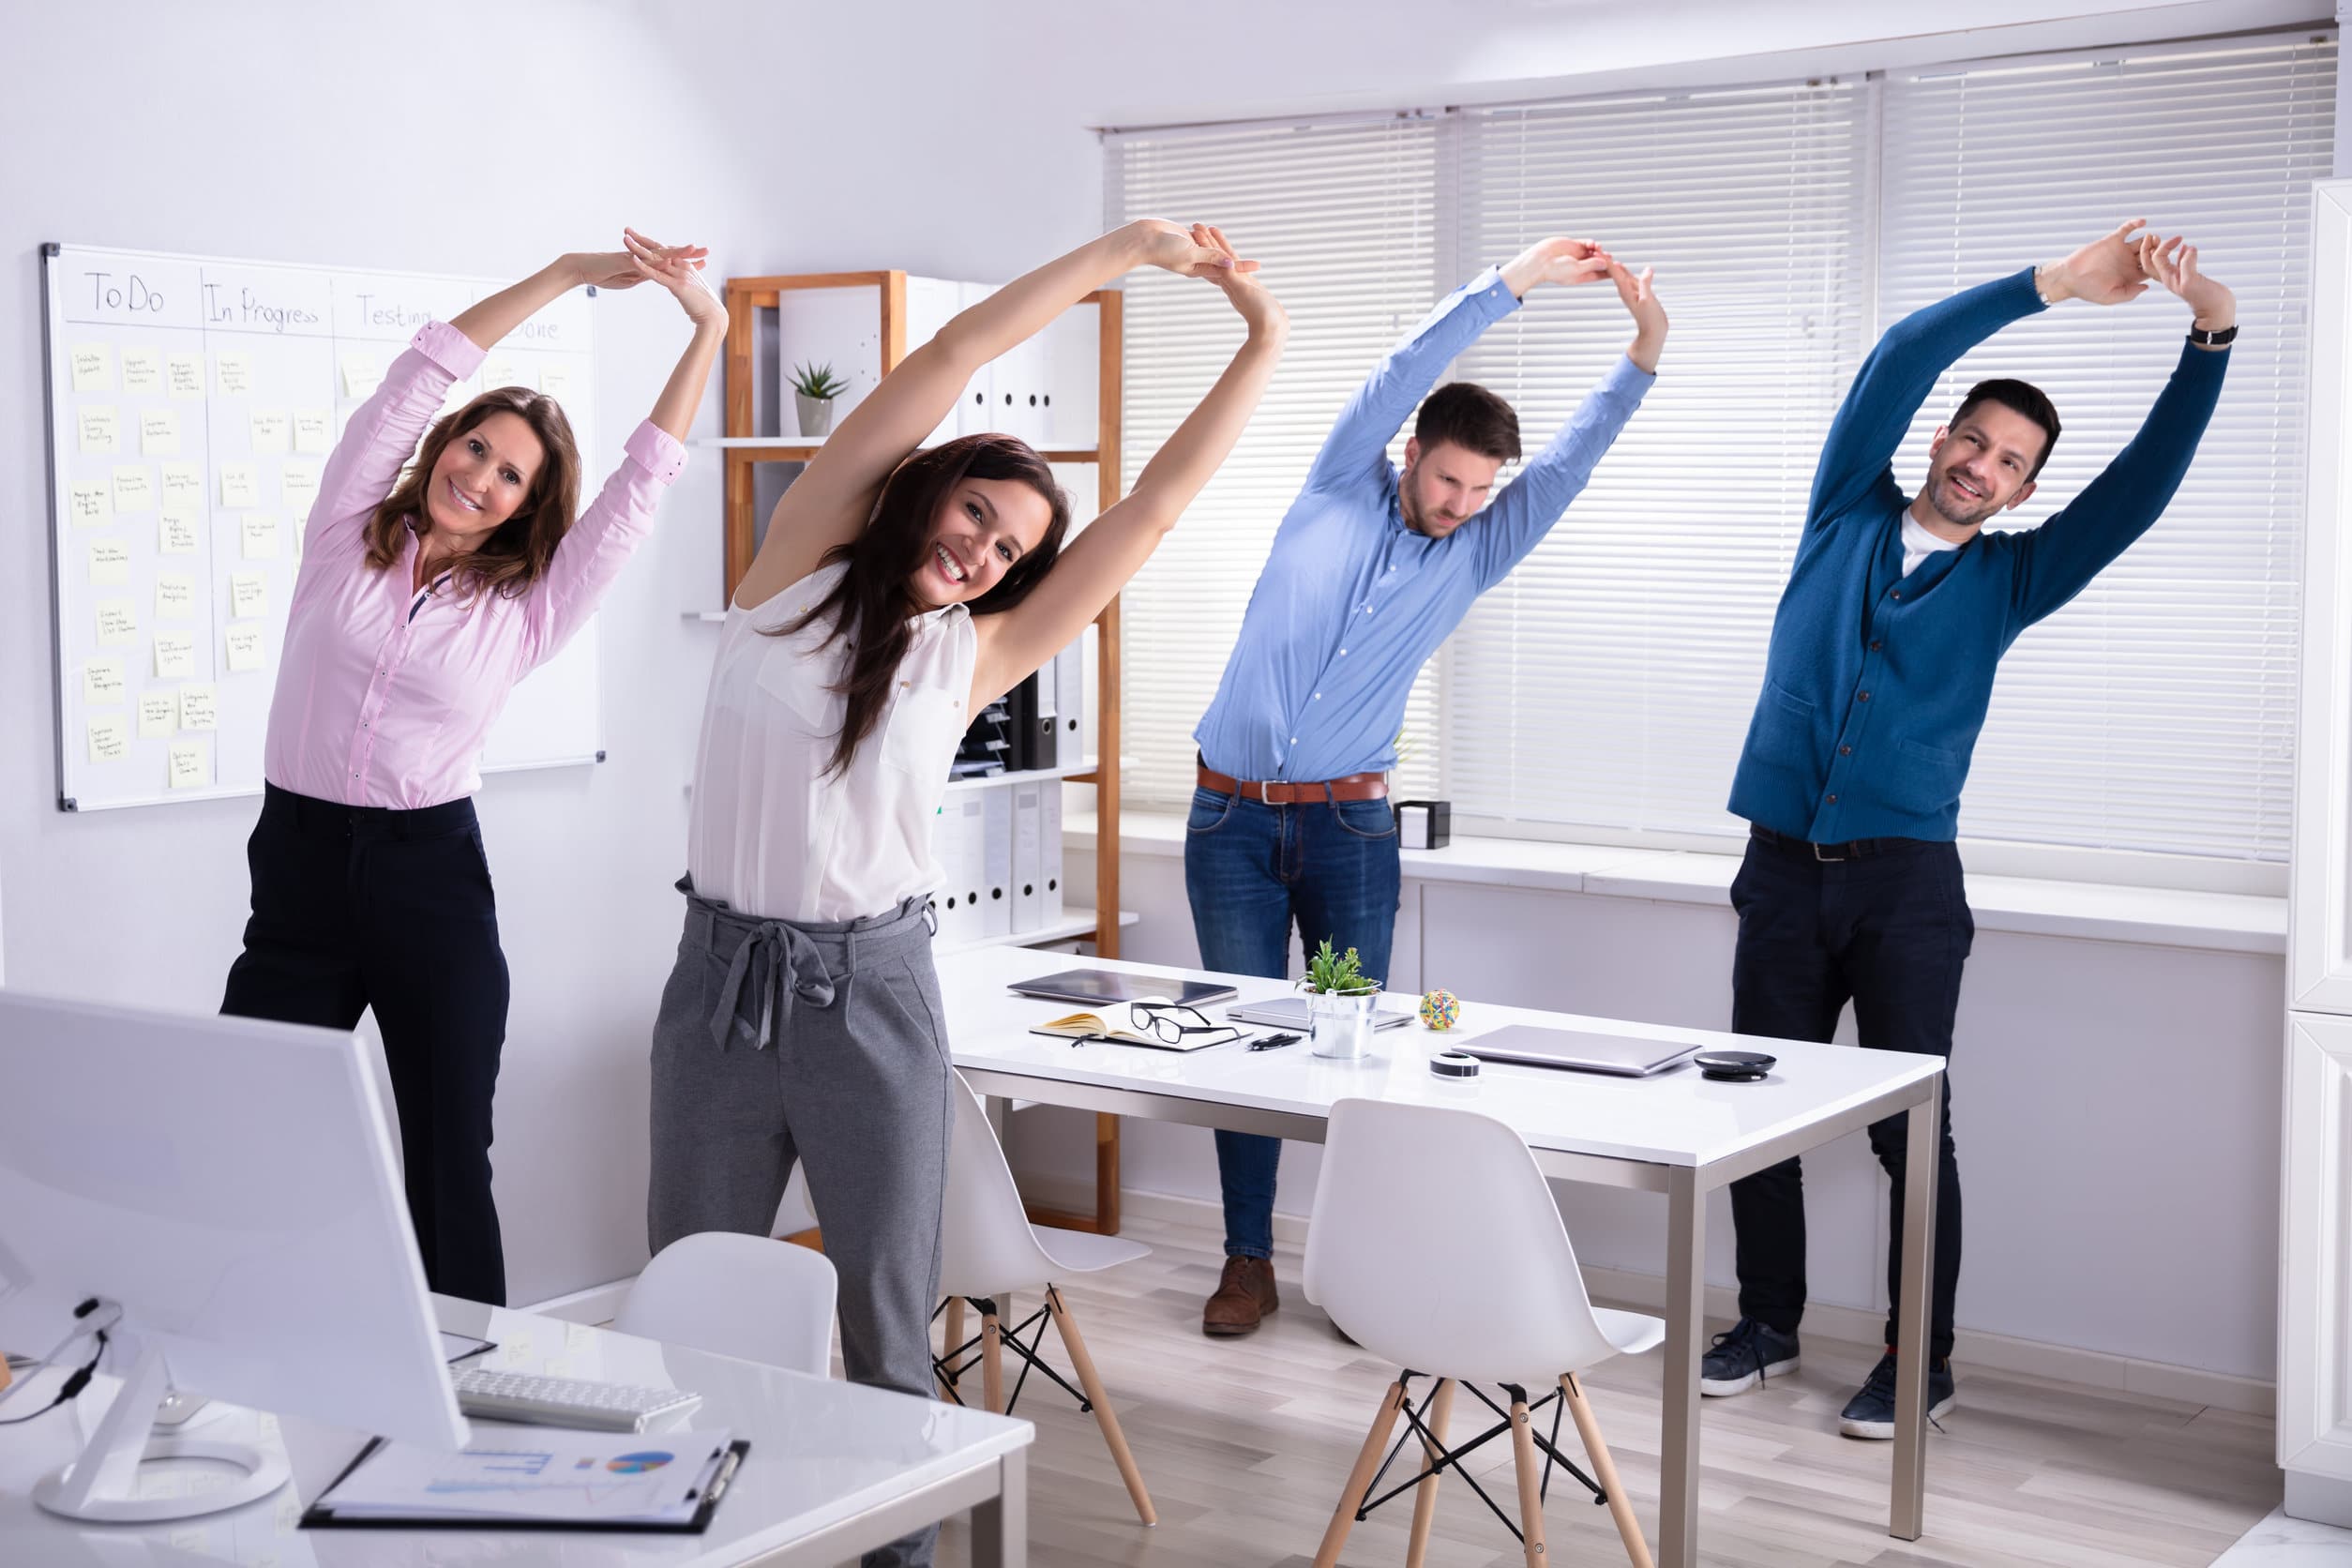 Yoga Poses You Can Do at the Desk